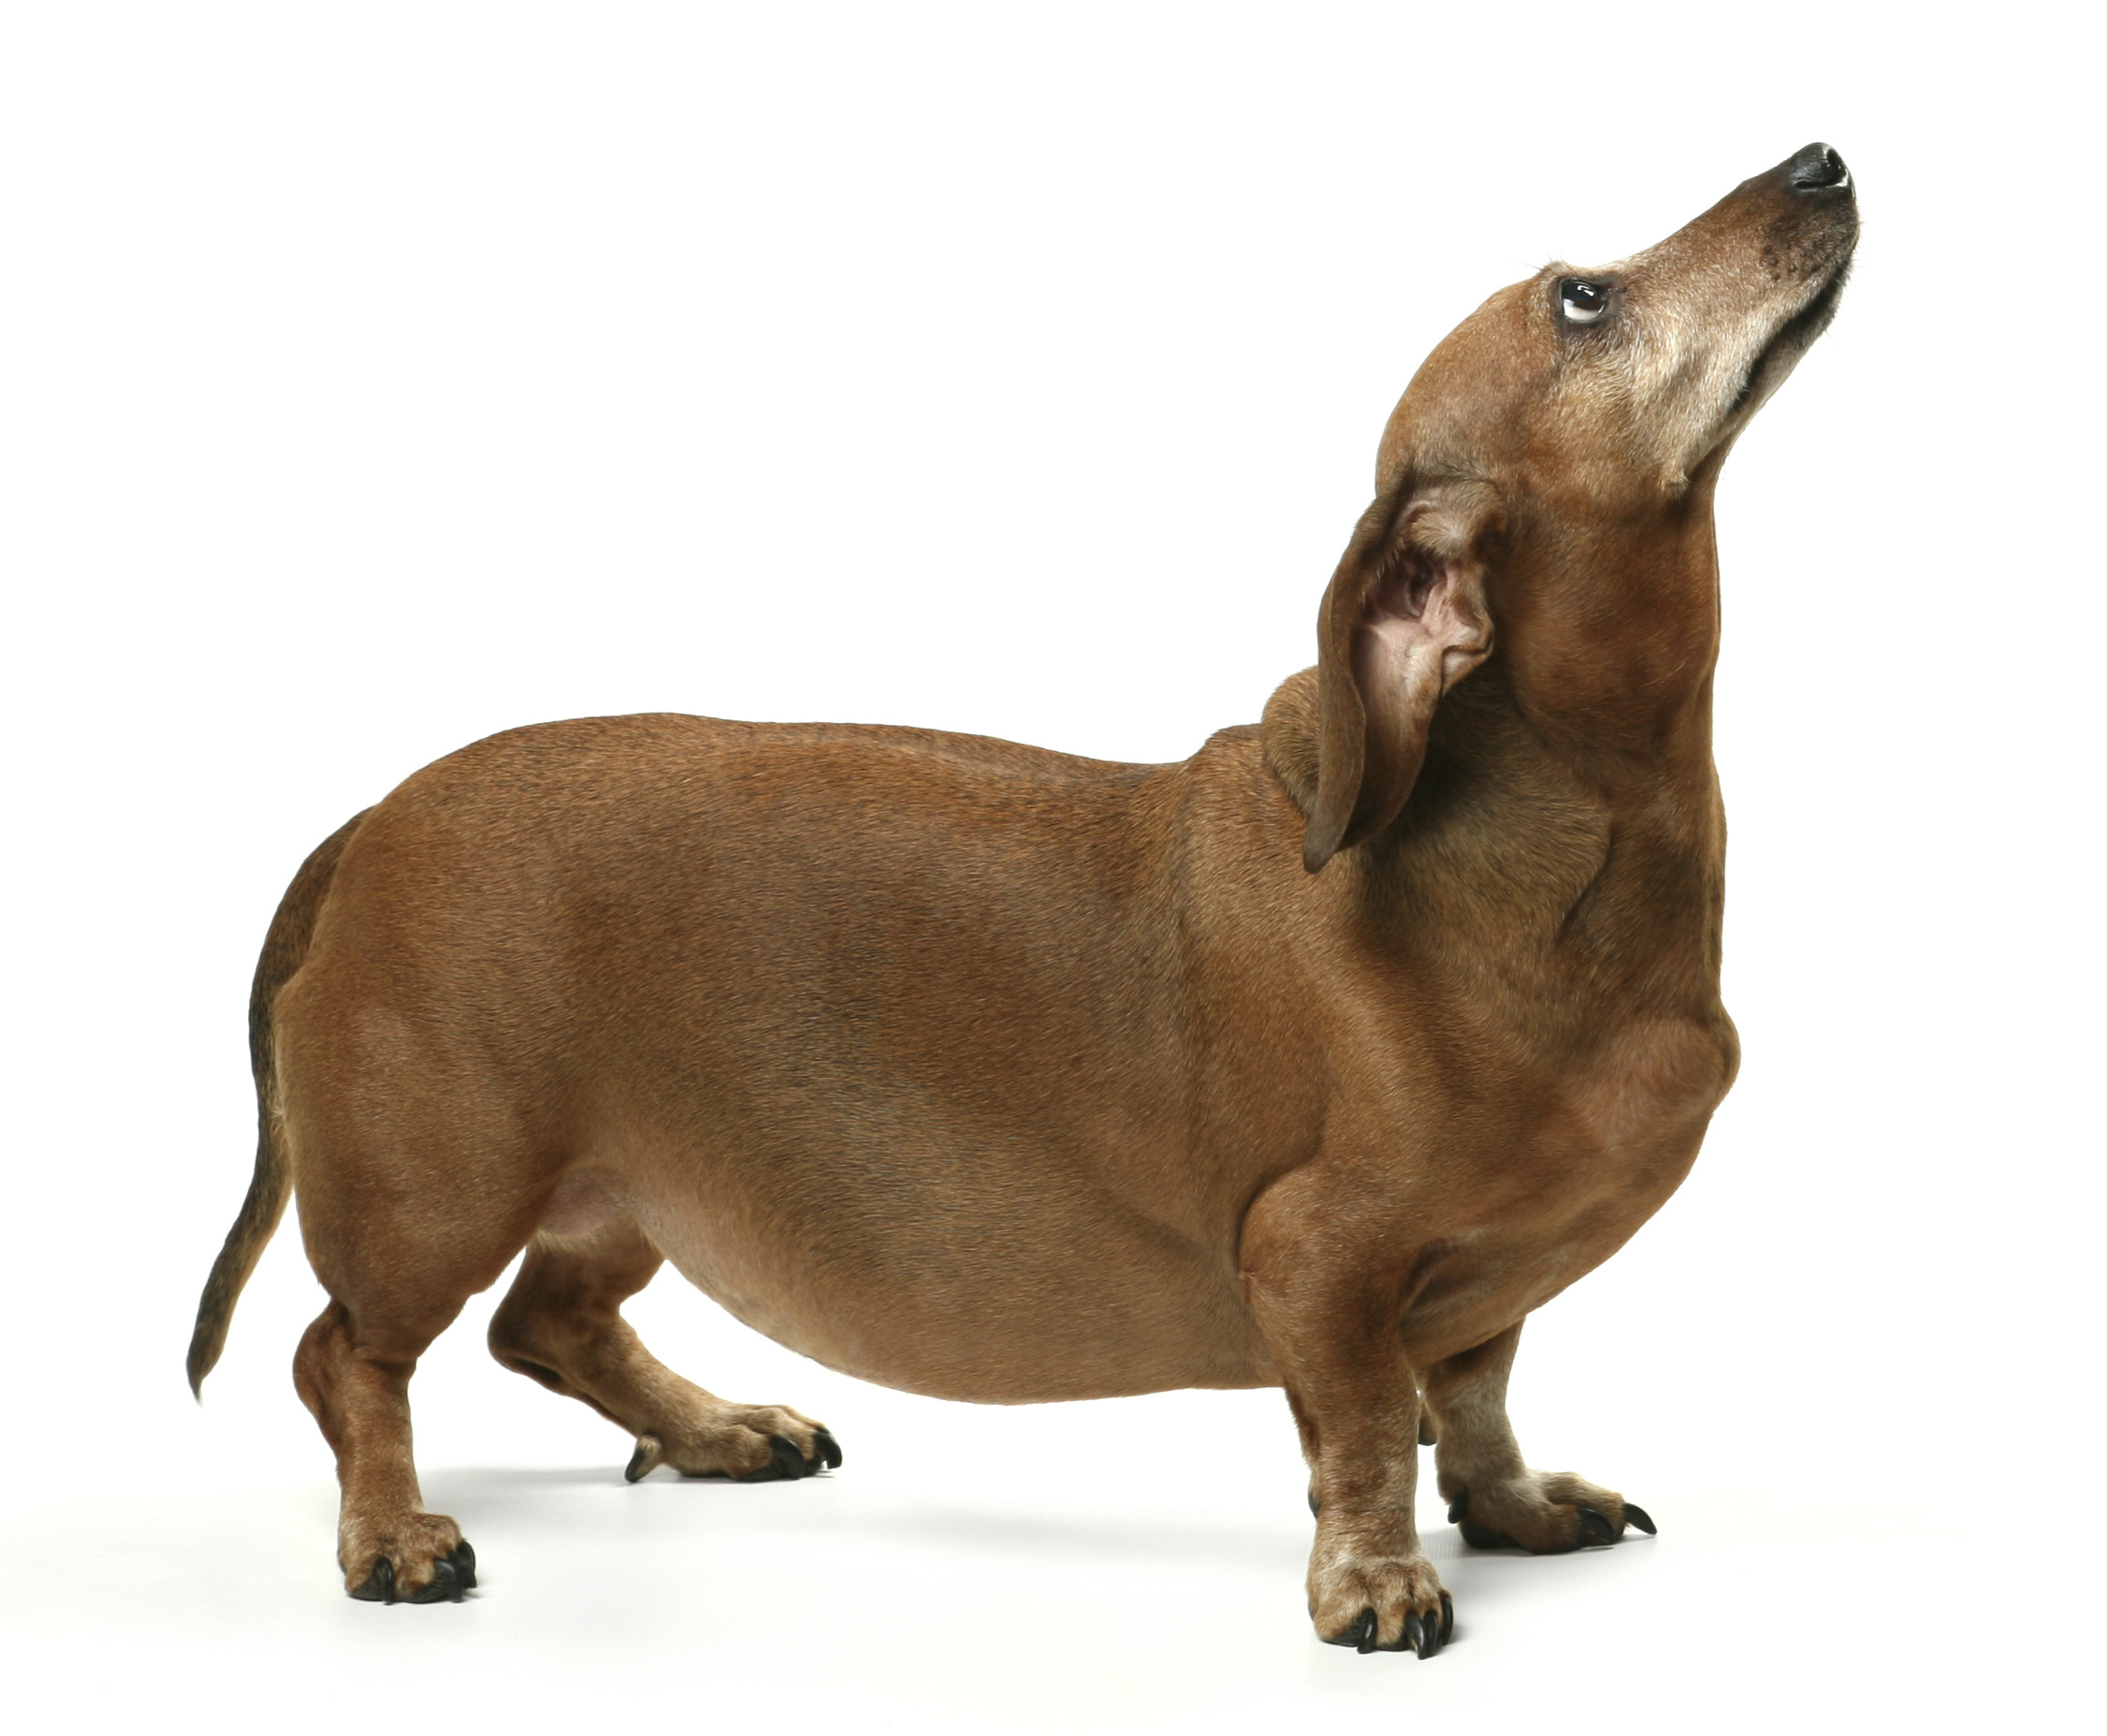 Dog Png Image Picture Downloa